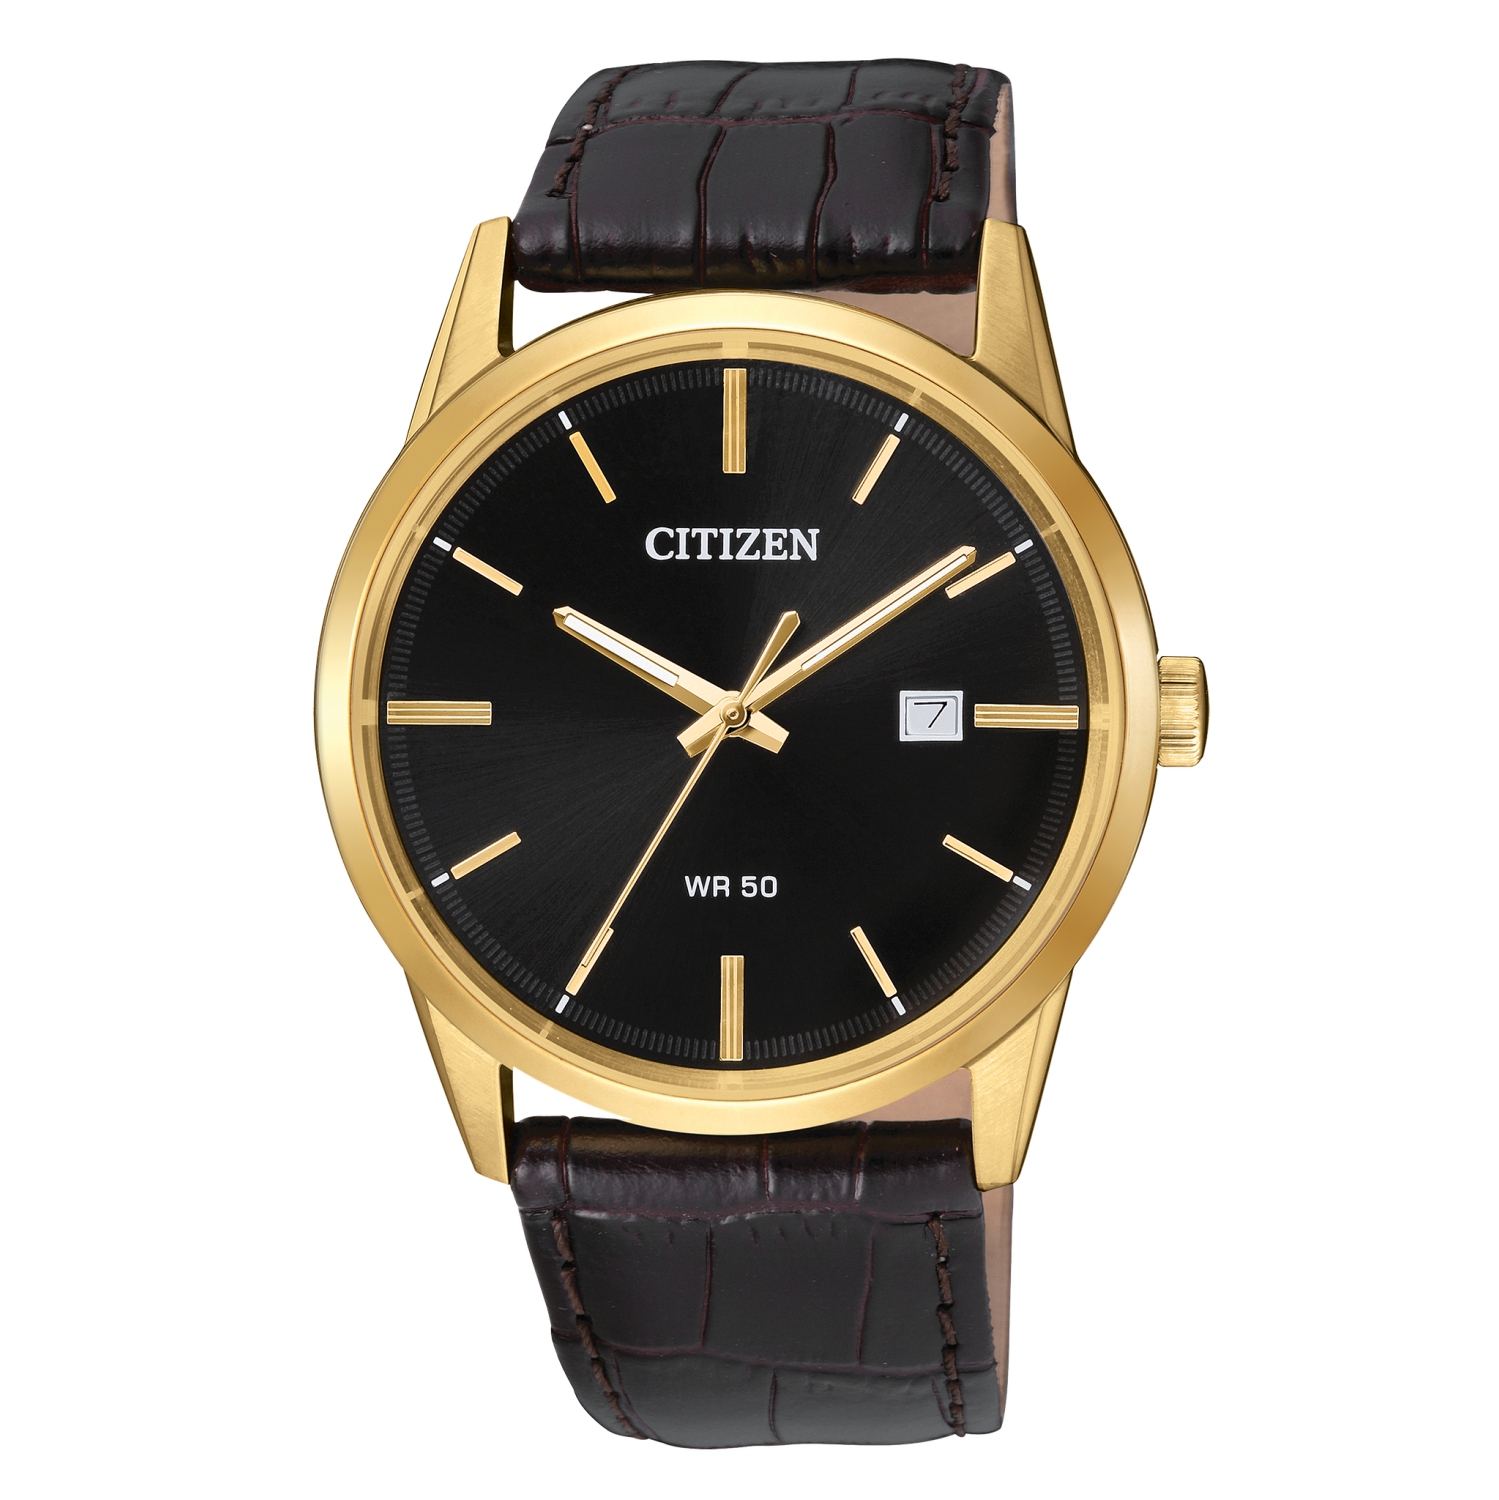 Citizen Mens Japanese Quartz Watch 39mm Gold-Tone Stainless Steel Case Brown Leather Strap with Black Dial (BI5002-06E)